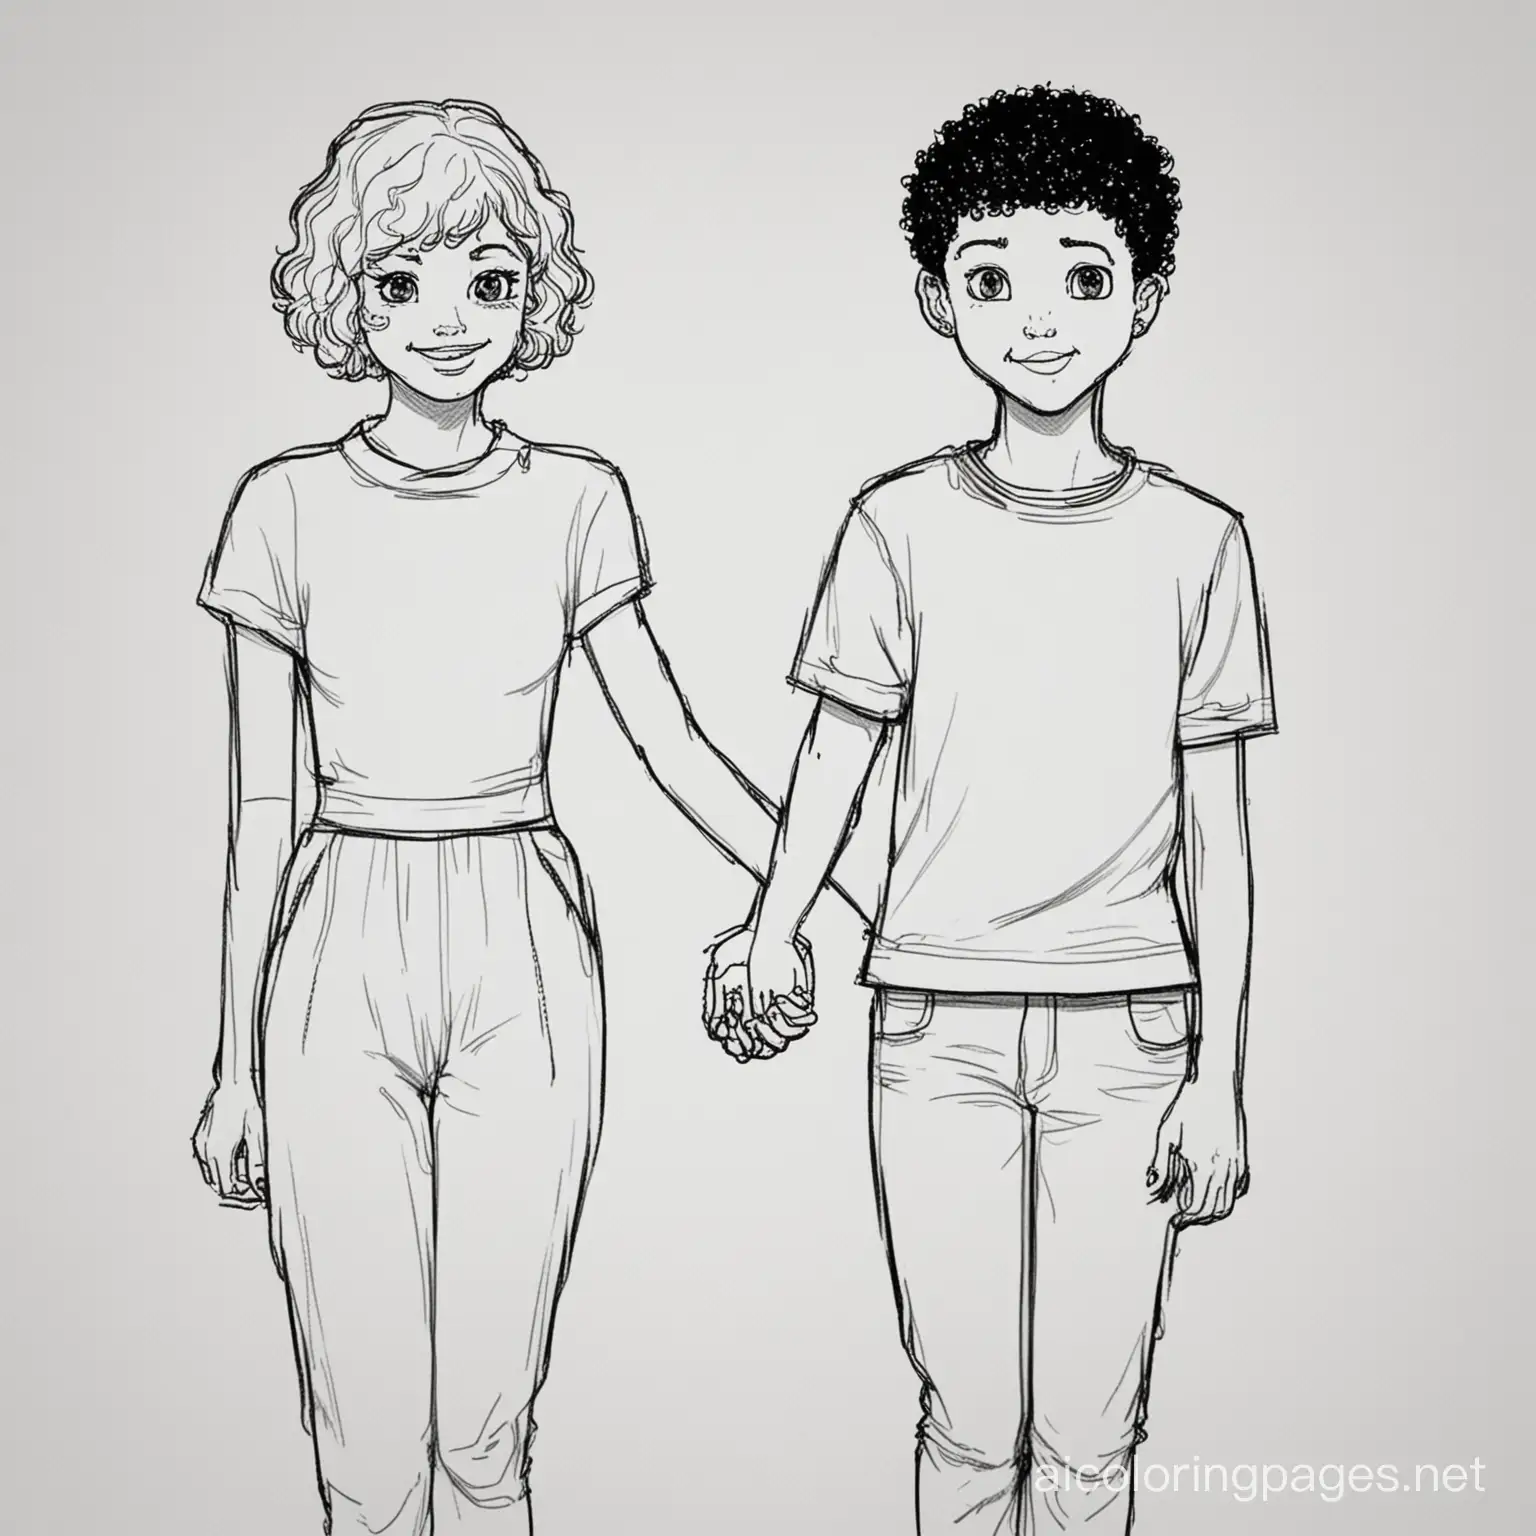 Teenage-Couple-Holding-Hands-Coloring-Page